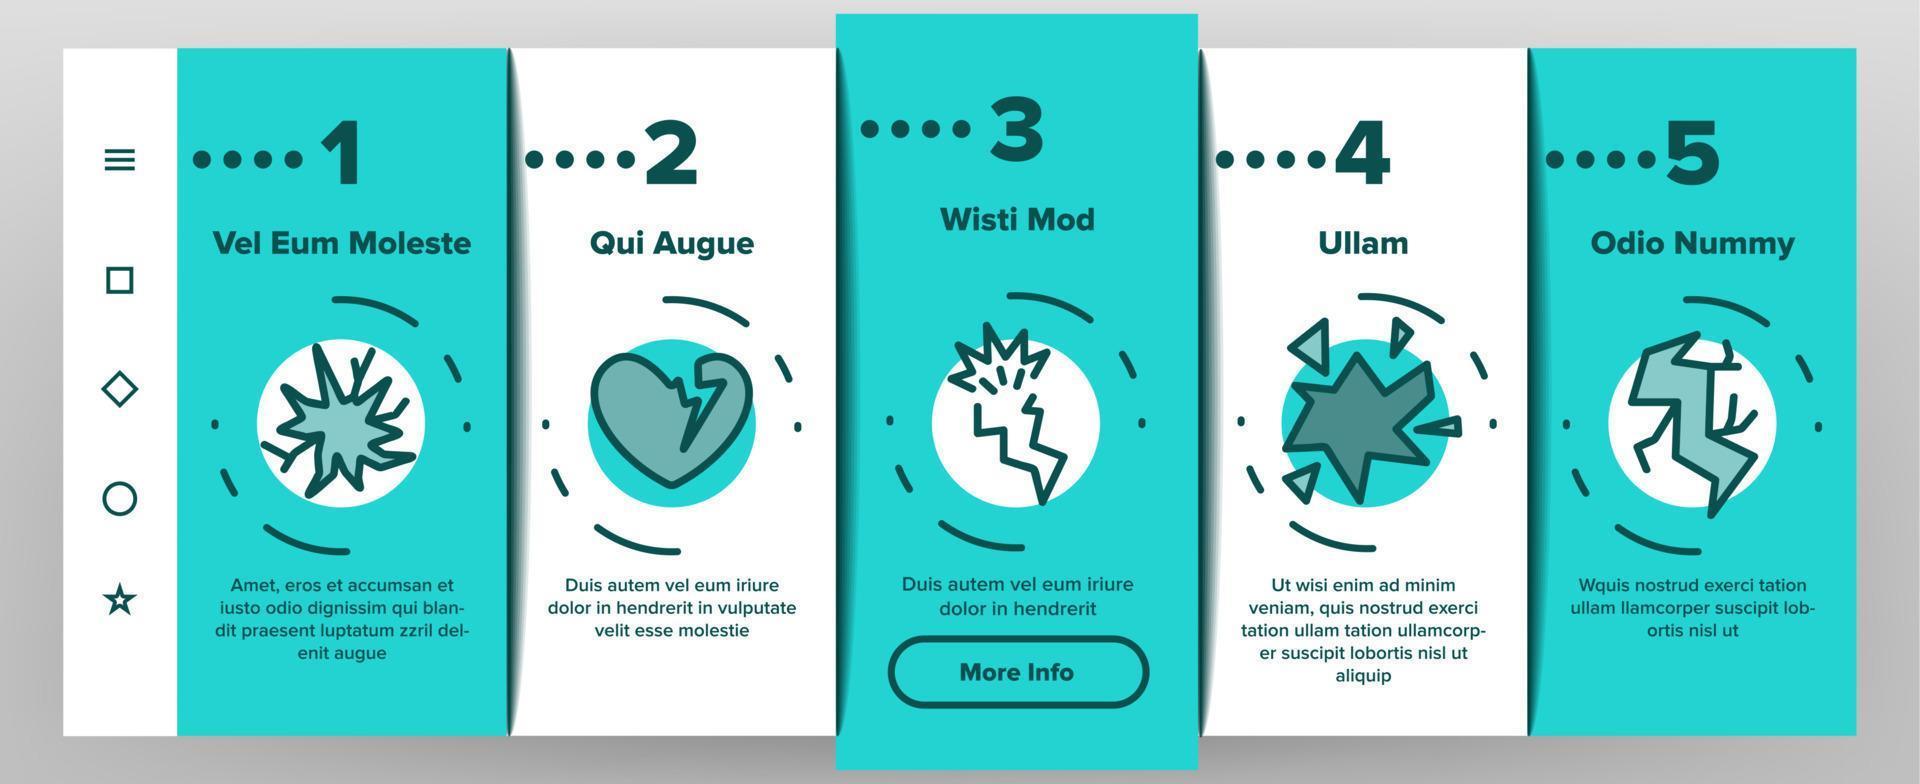 craquer les choses onboarding icons set vector